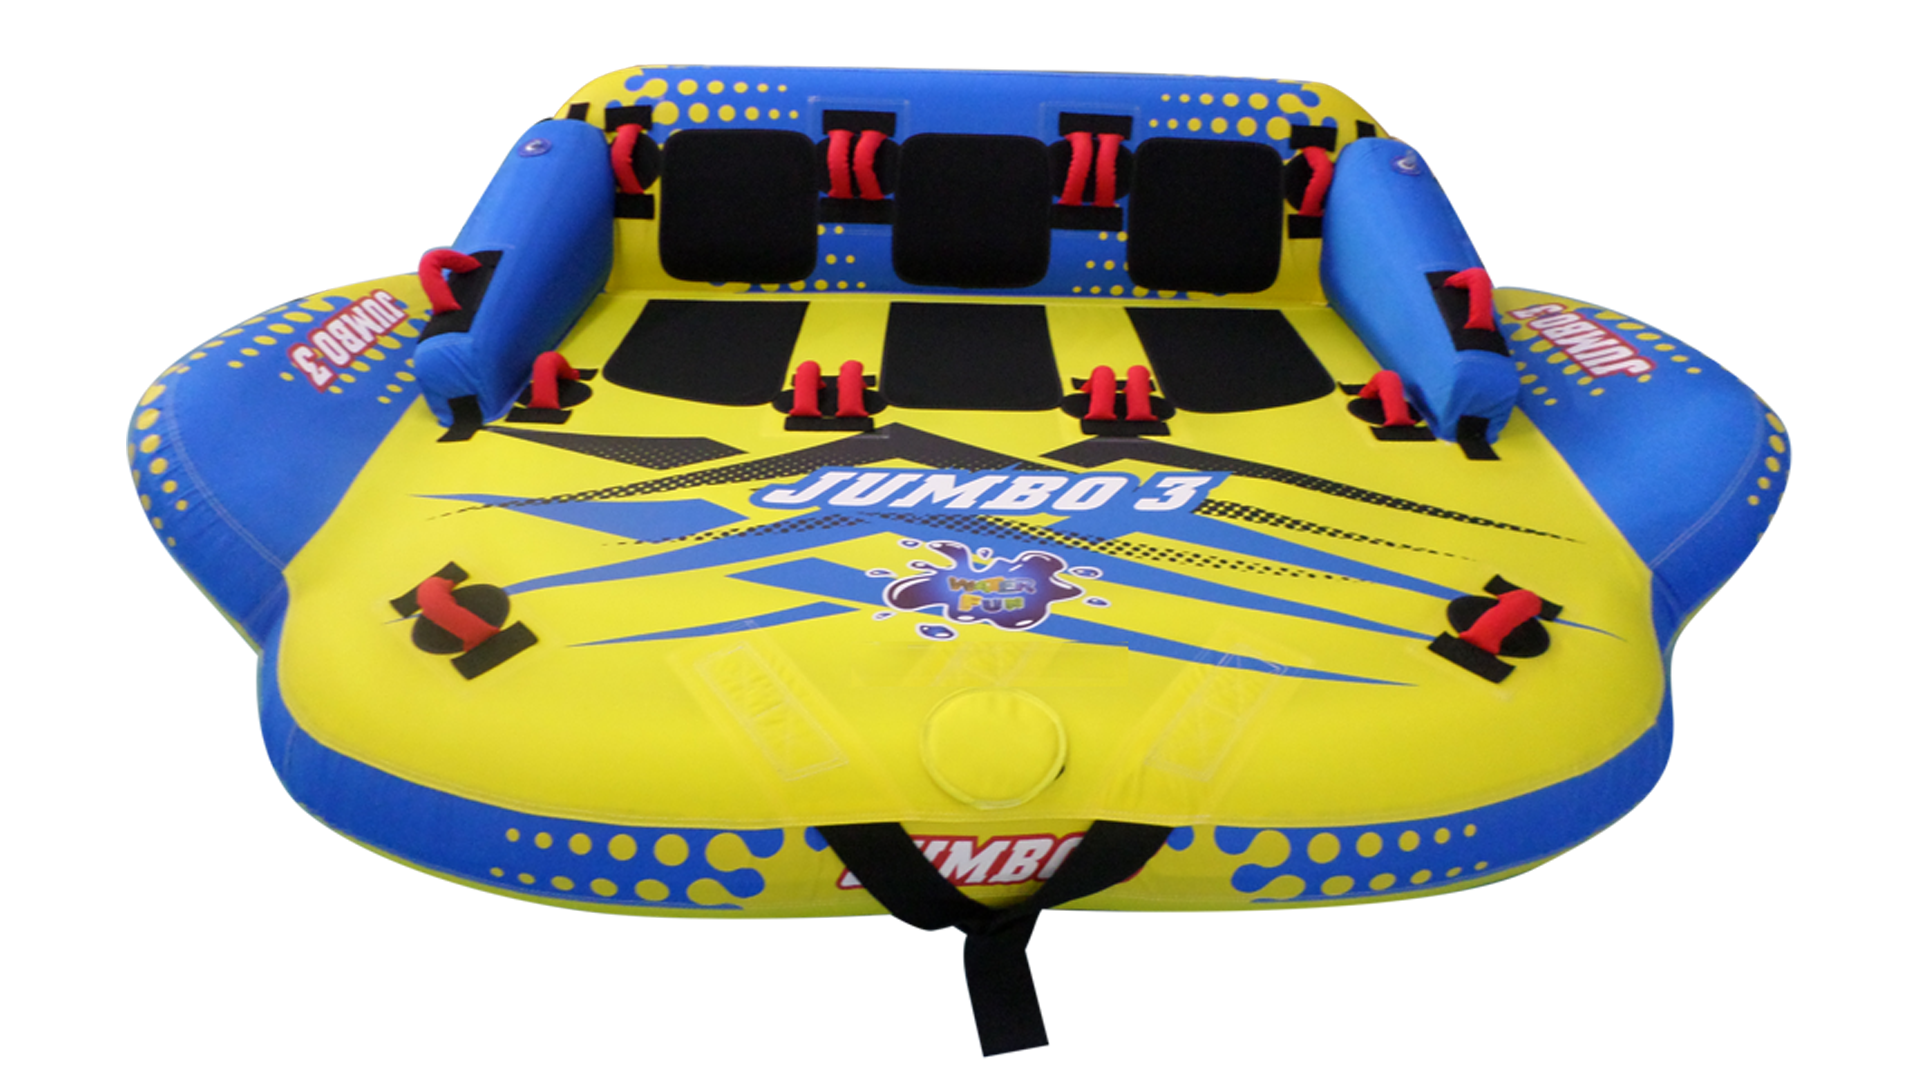 Details about   Sportsstuff Master Blaster Towable Inflatable Water Tube 3 Person Rider 53-1831 